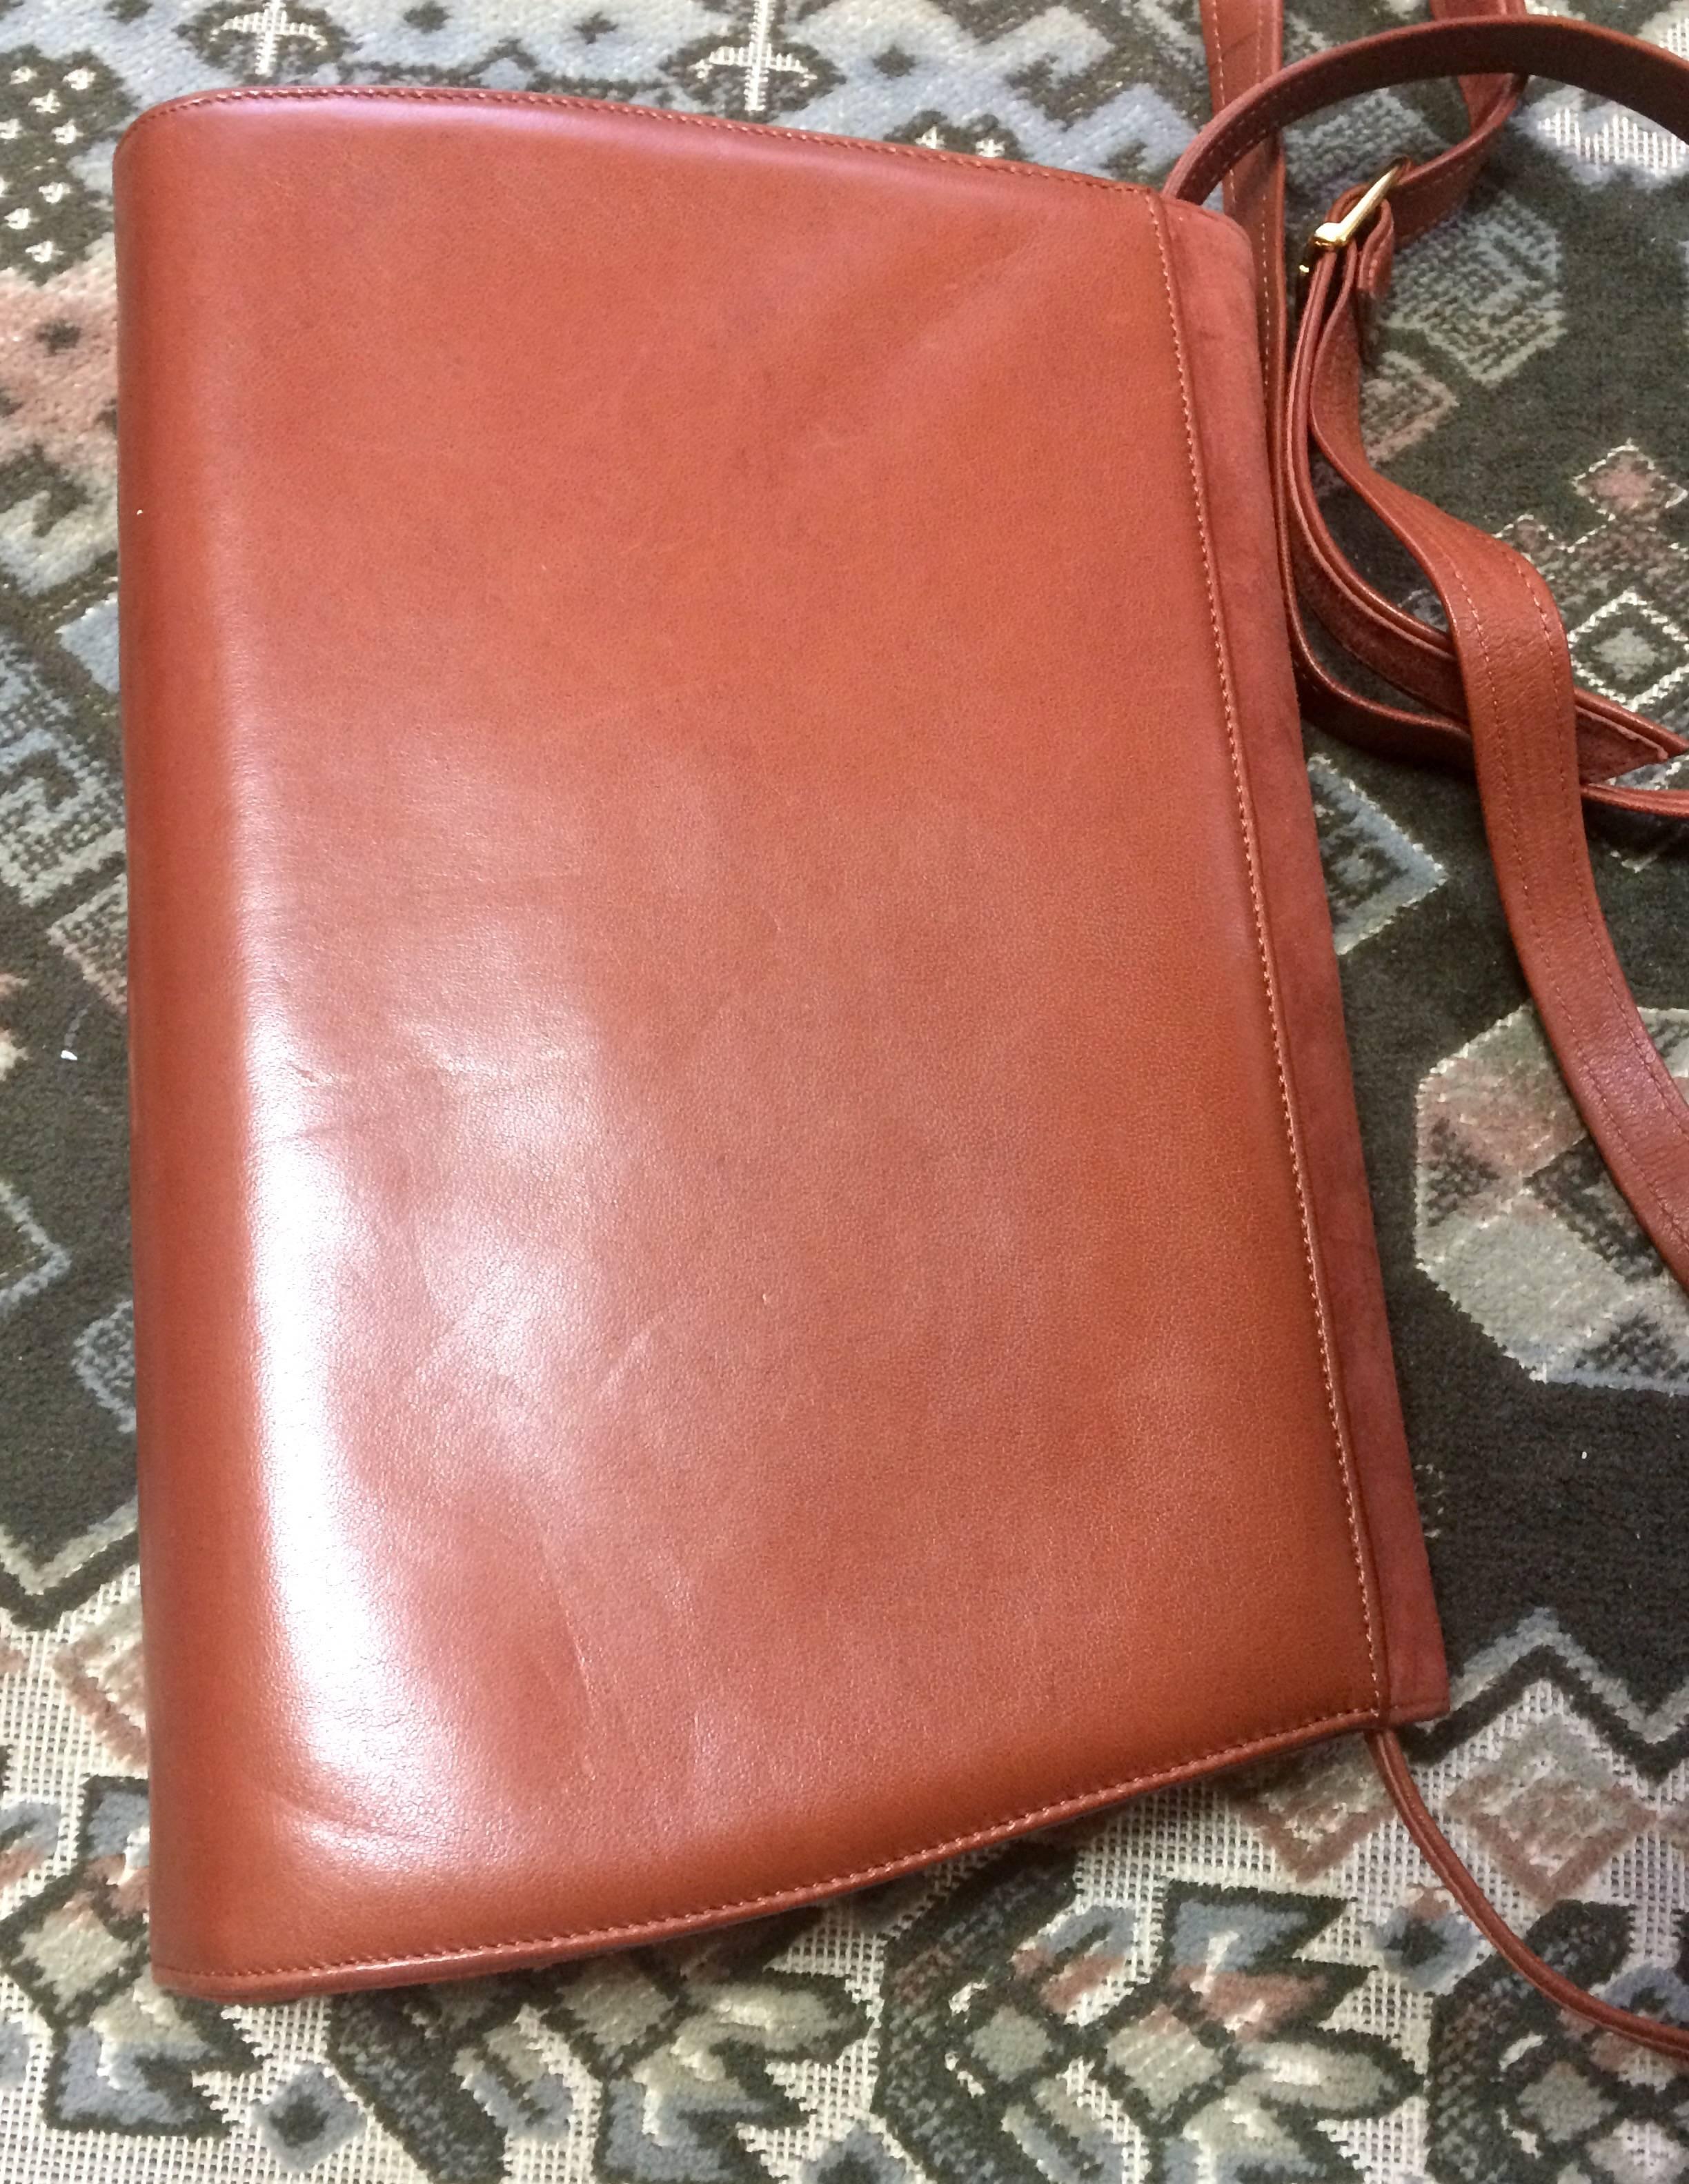 Women's Vintage Bally brown, red, and purple suede leather shoulder bag, clutch bag. For Sale